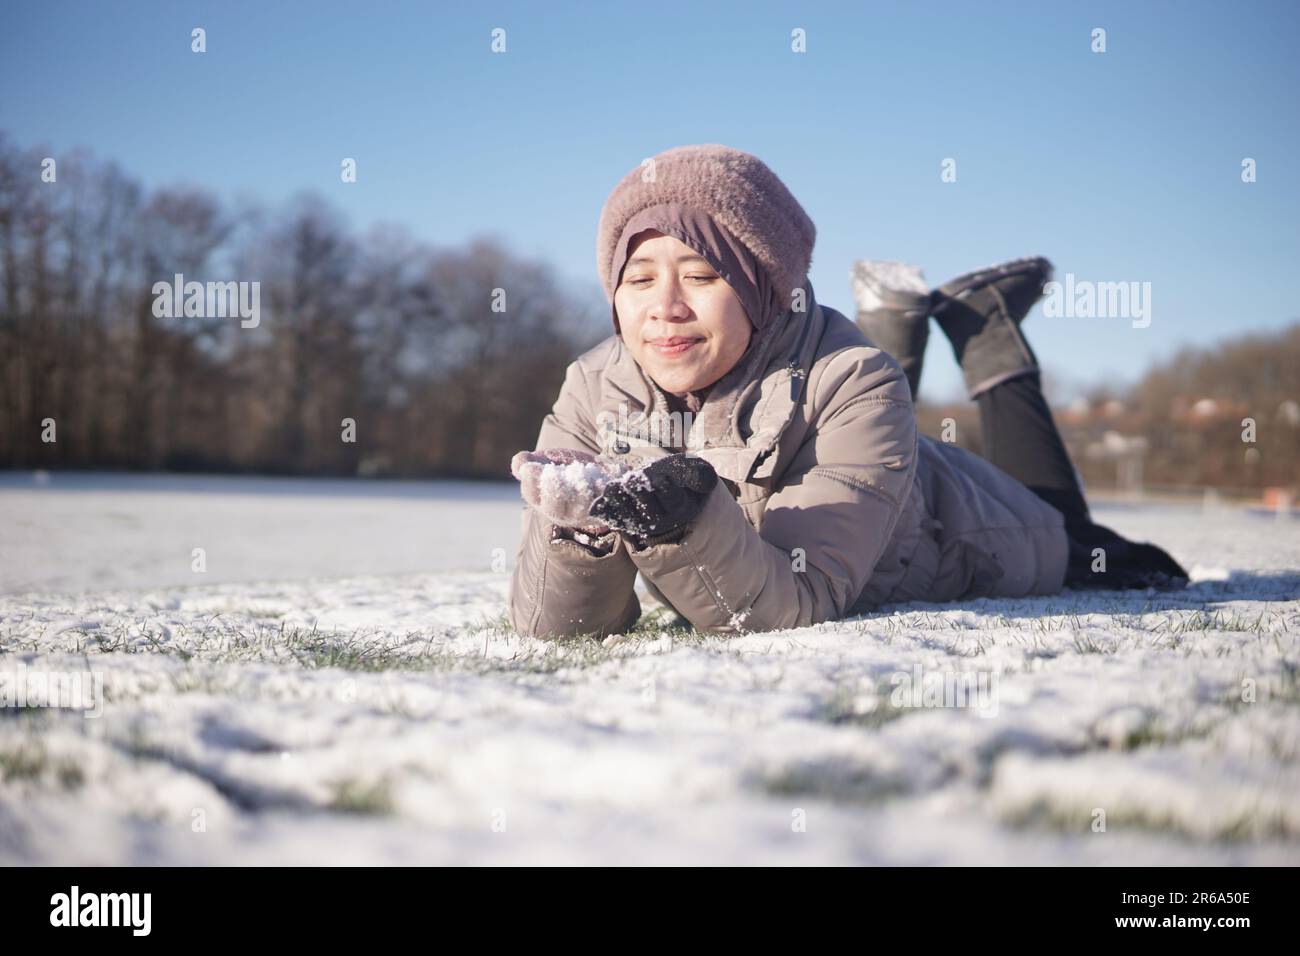 A female figure lies in the snow, her arm outstretched, clutching an unknown object Stock Photo